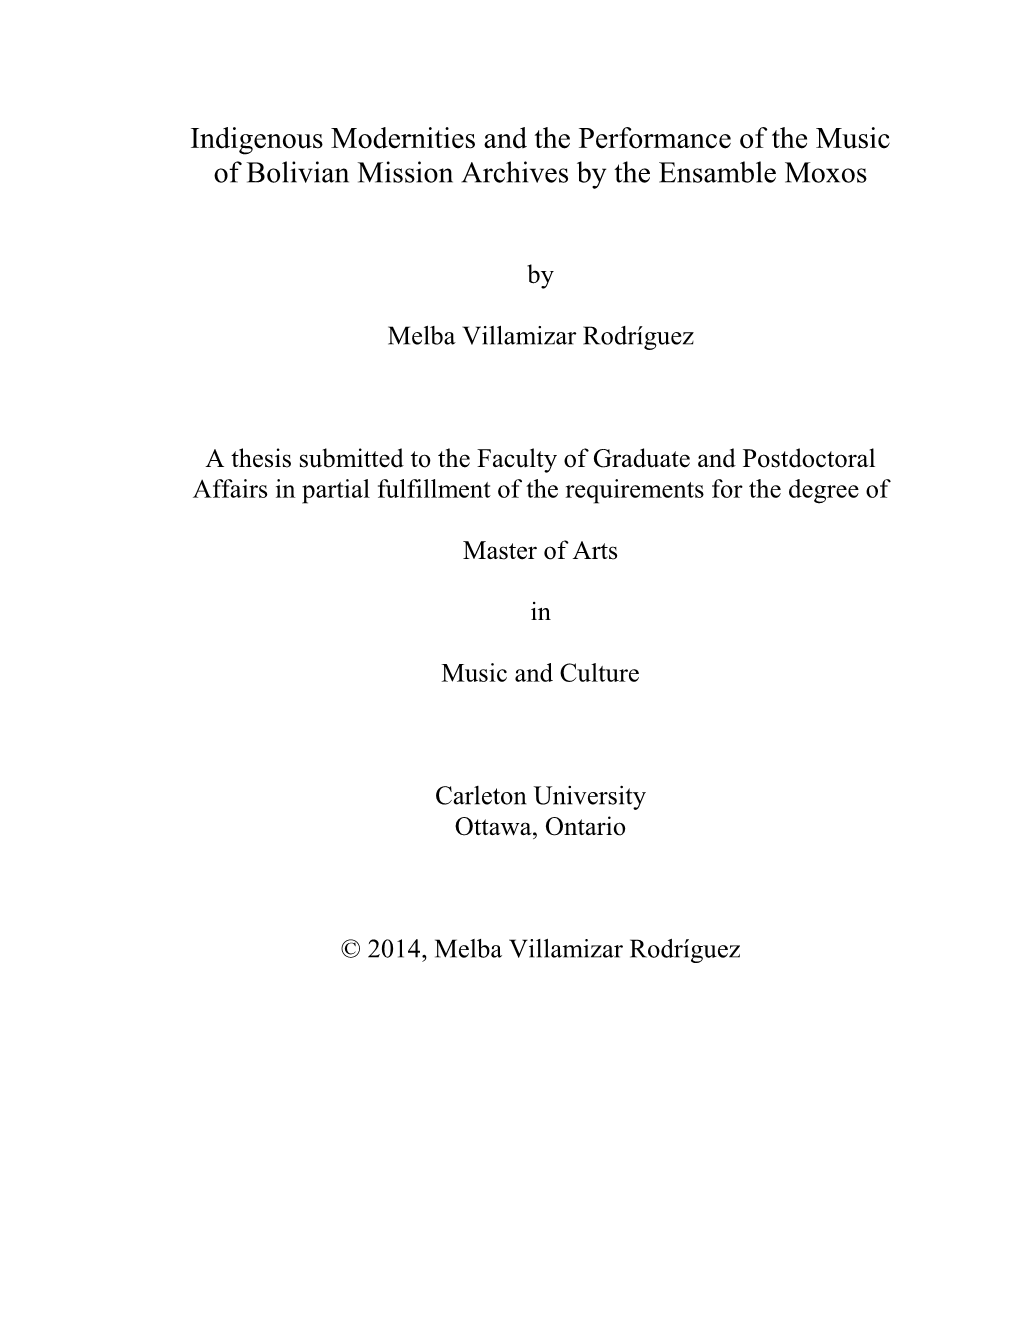 Indigenous Modernities and the Performance of the Music of Bolivian Mission Archives by the Ensamble Moxos